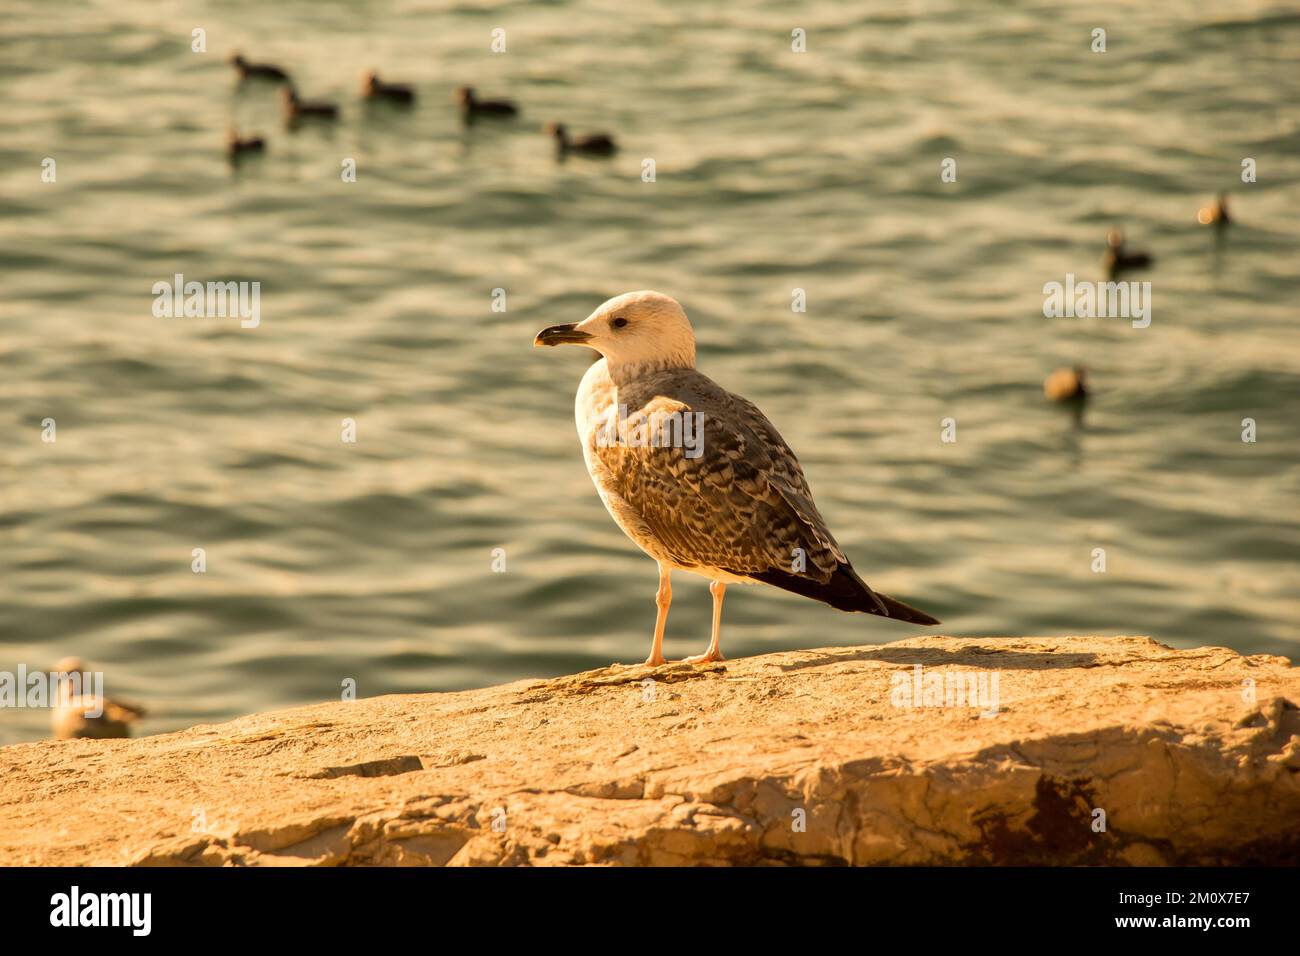 Seagulls are on the rock by the sea waters Stock Photo